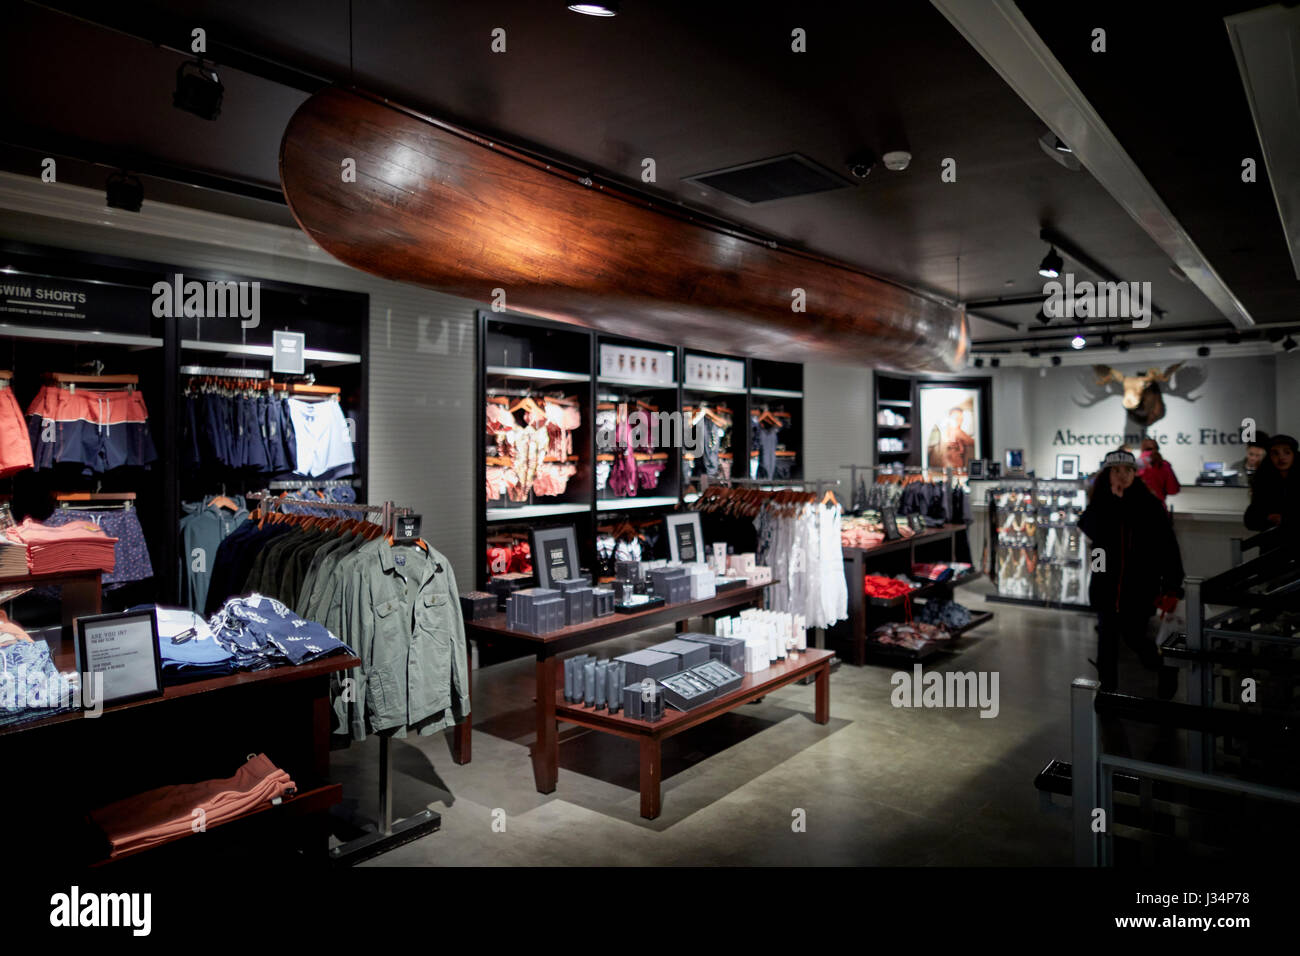 abercrombie and fitch united states